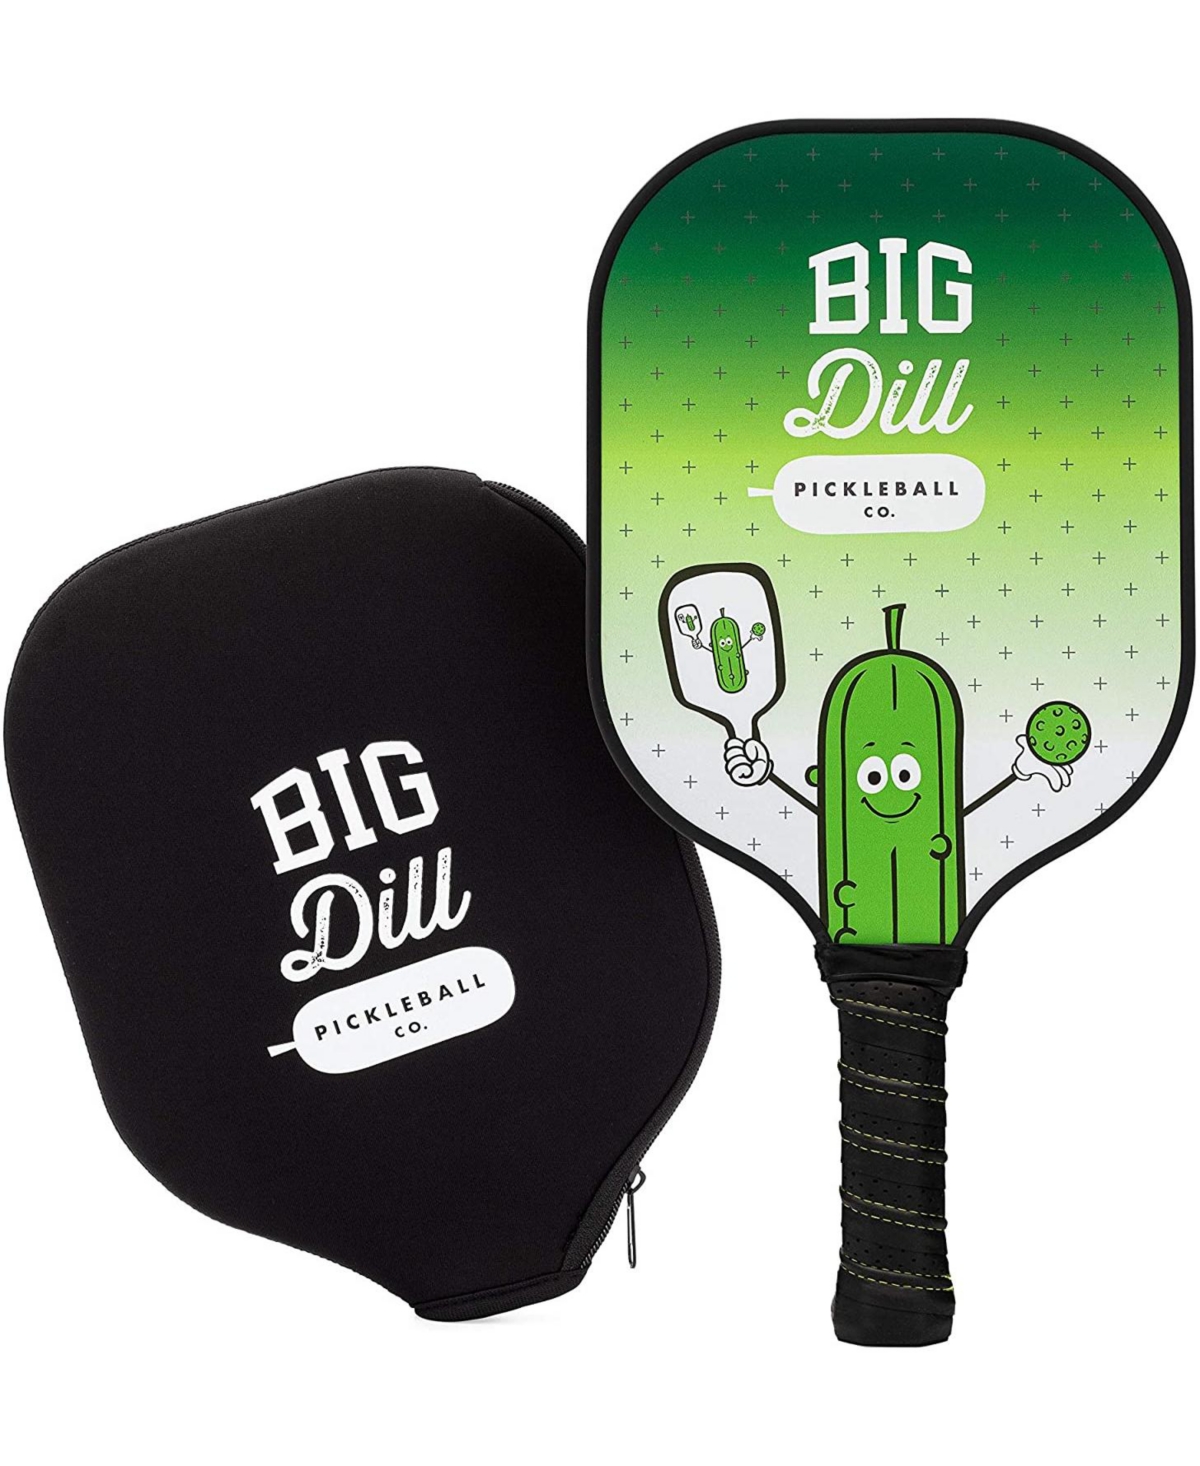 Original Carbon Fiber Pickleball Paddle with Cover - Green